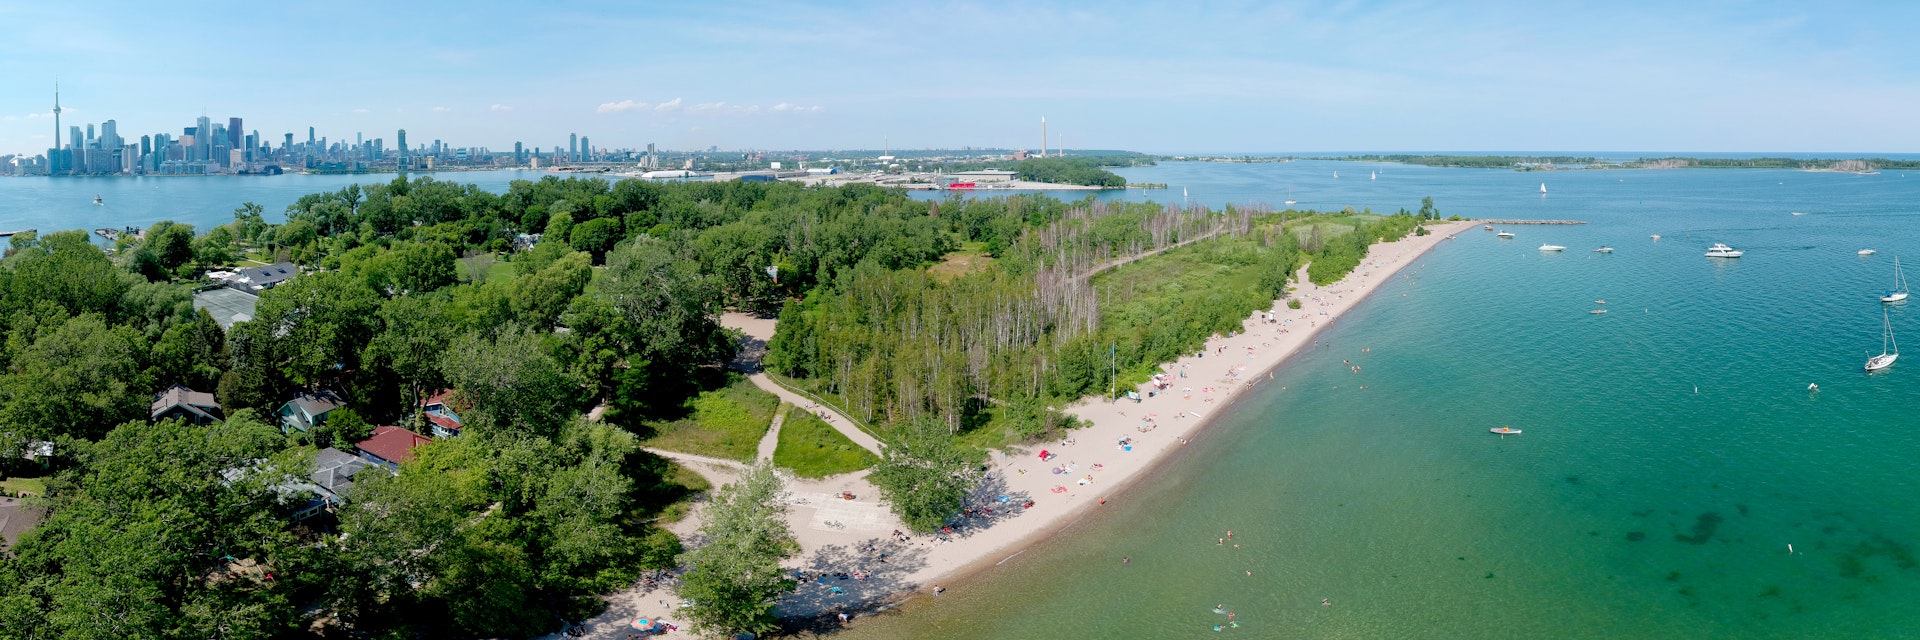 Toronto Central Islands and Ward's Island Park beach, Ontario, Canada, aerial view from top at sunny greenery and sandy coast with boats, people swimming at summer. Popular tourist location.
1261754618